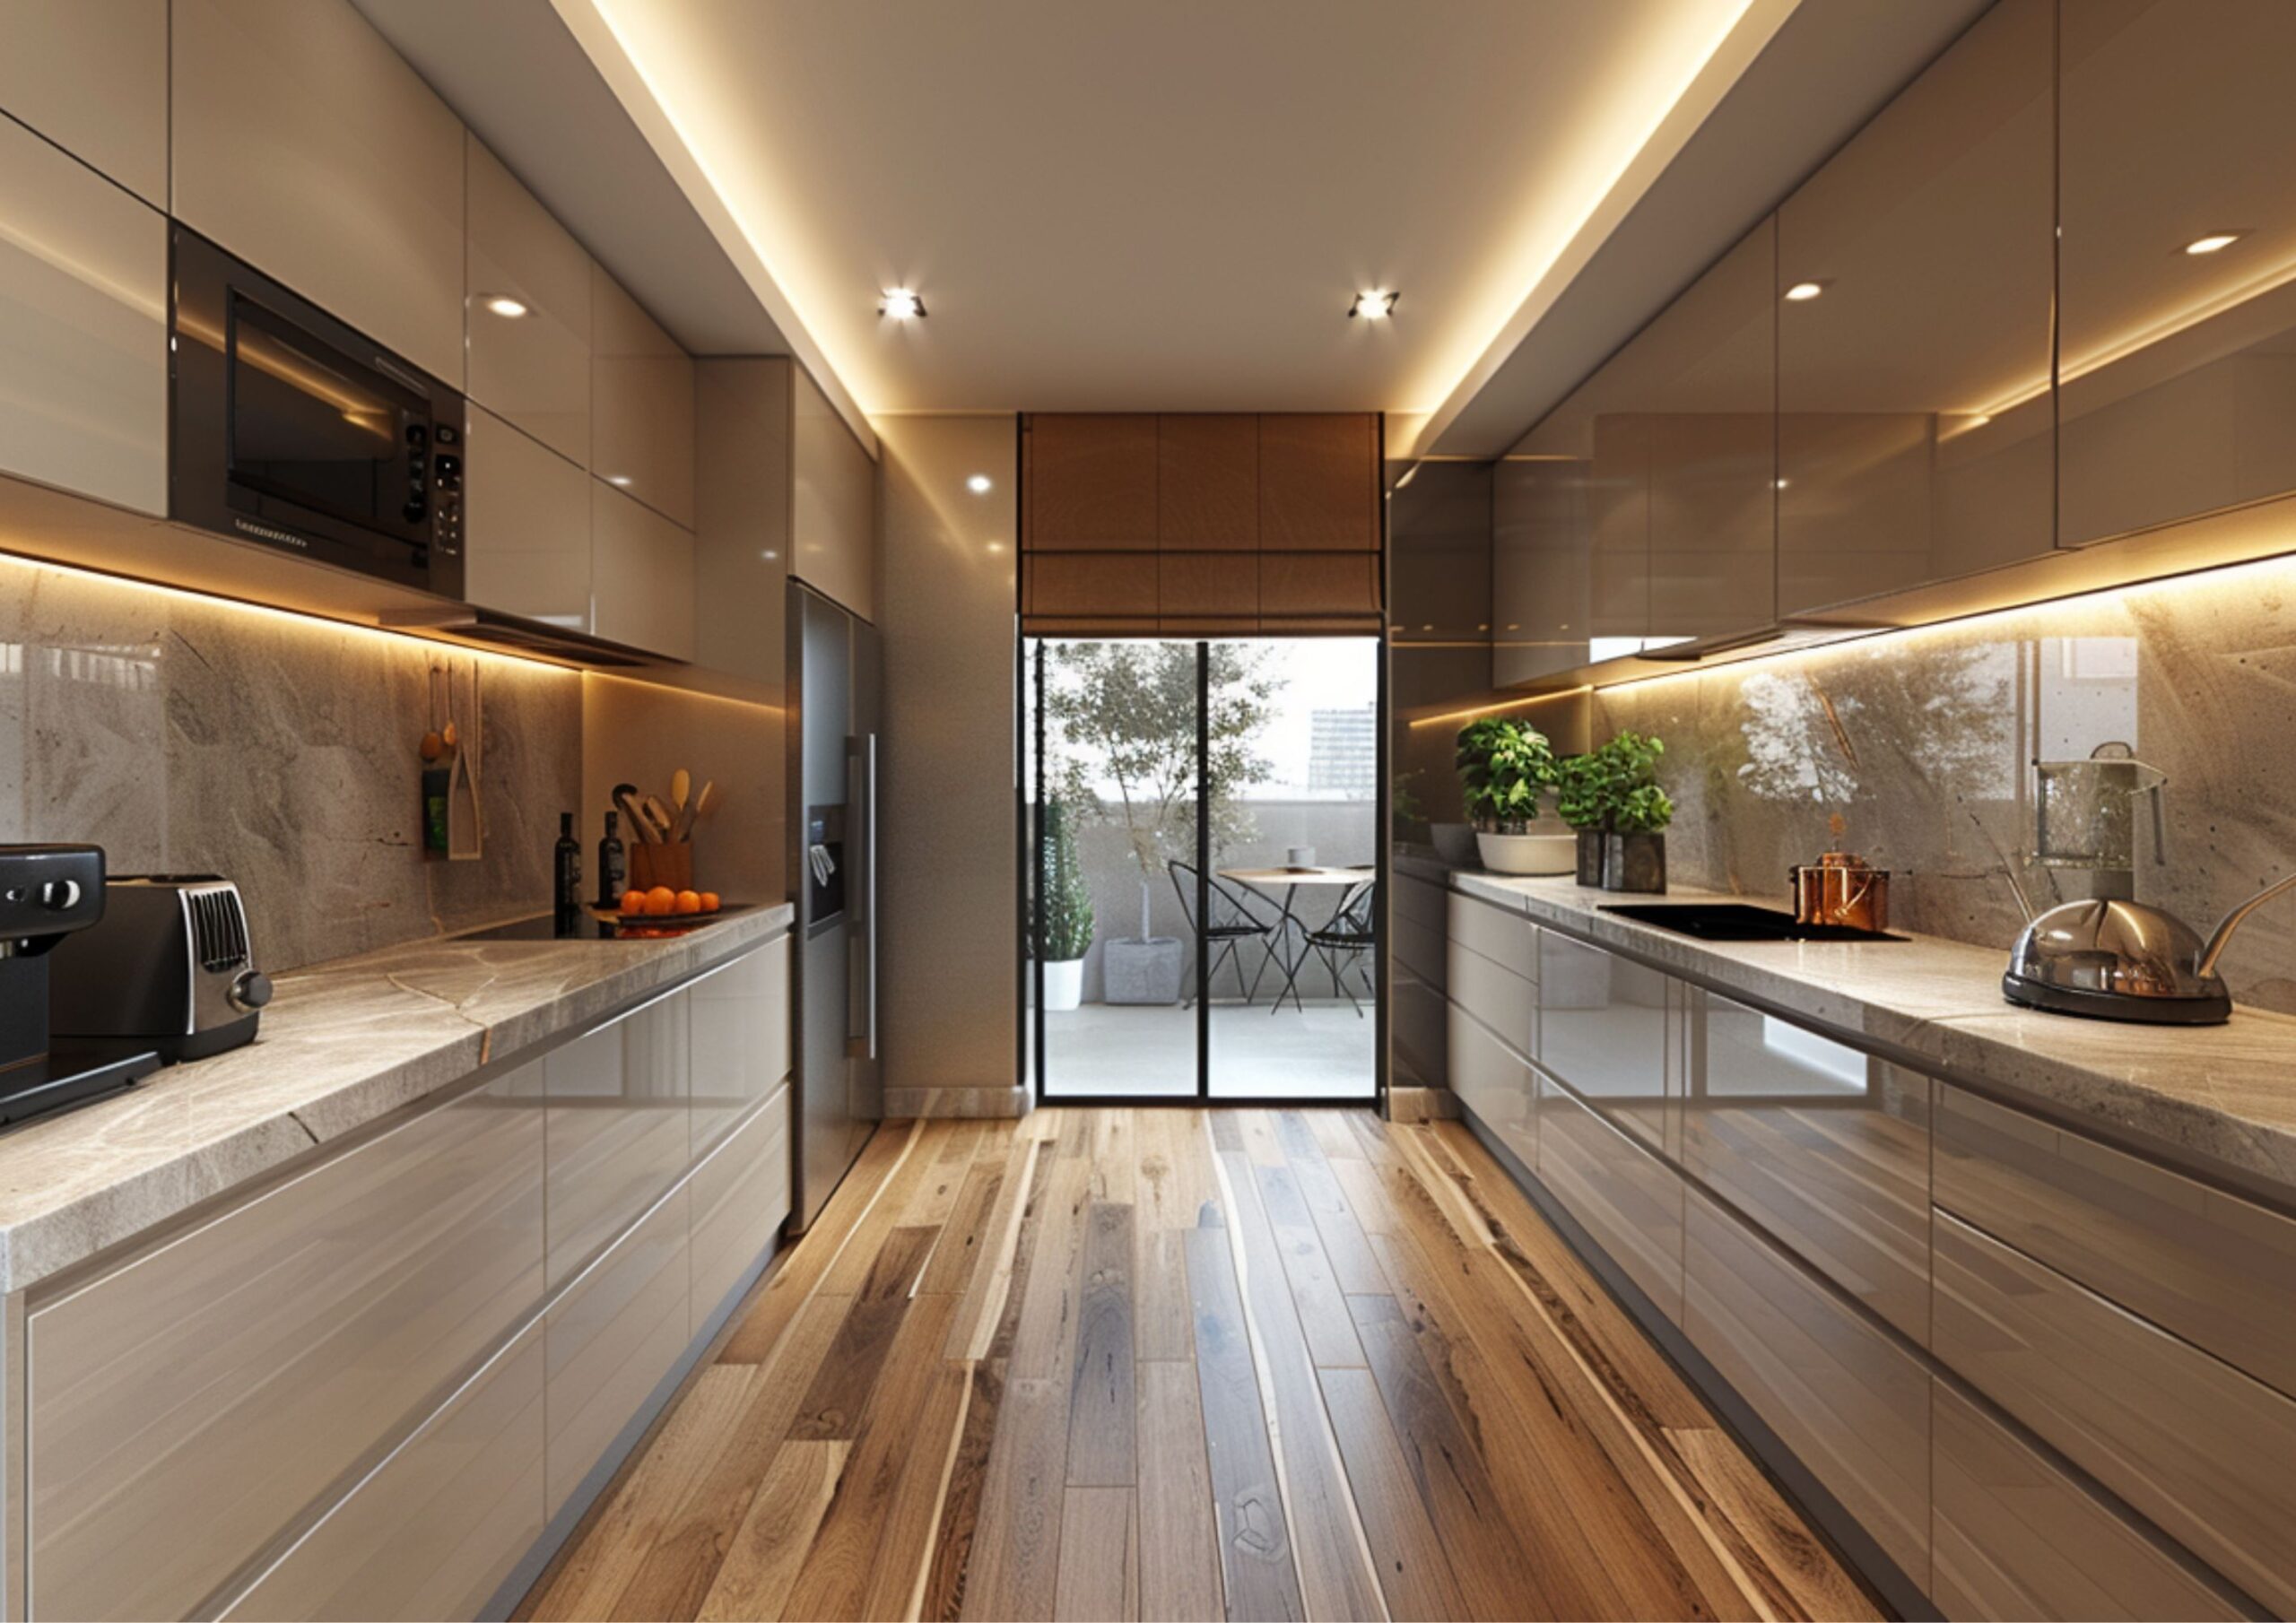 Galley Kitchens: Making the Most of Every Inch.